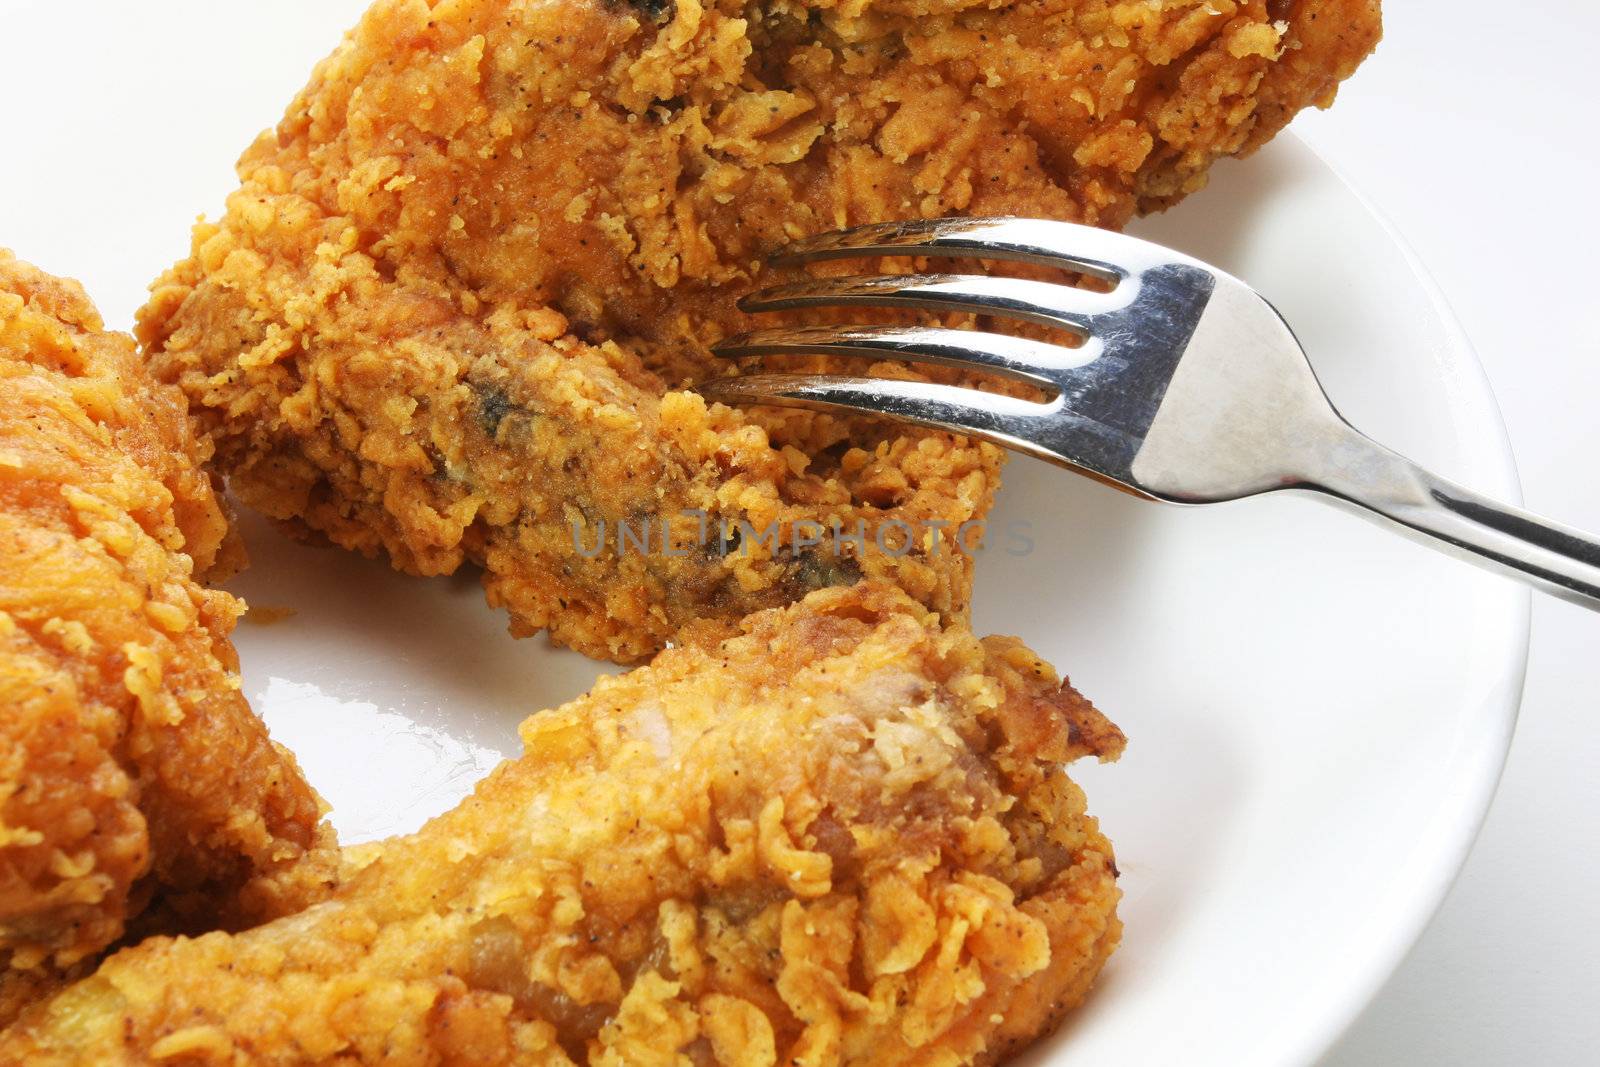 Southern style fried chicken